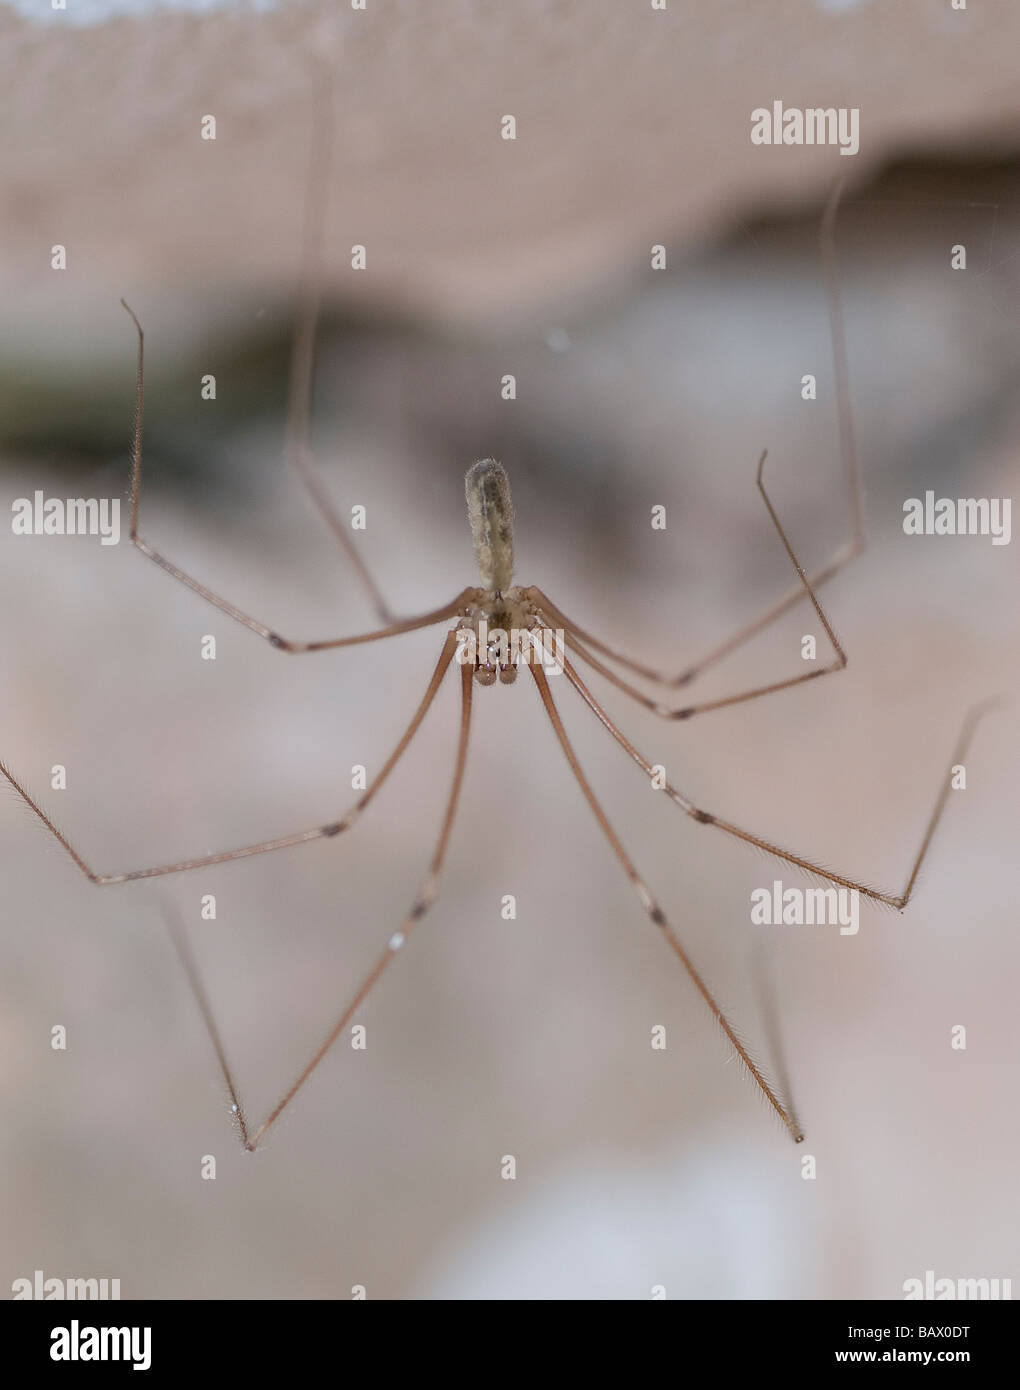 Daddy long legs spider Stock Photo